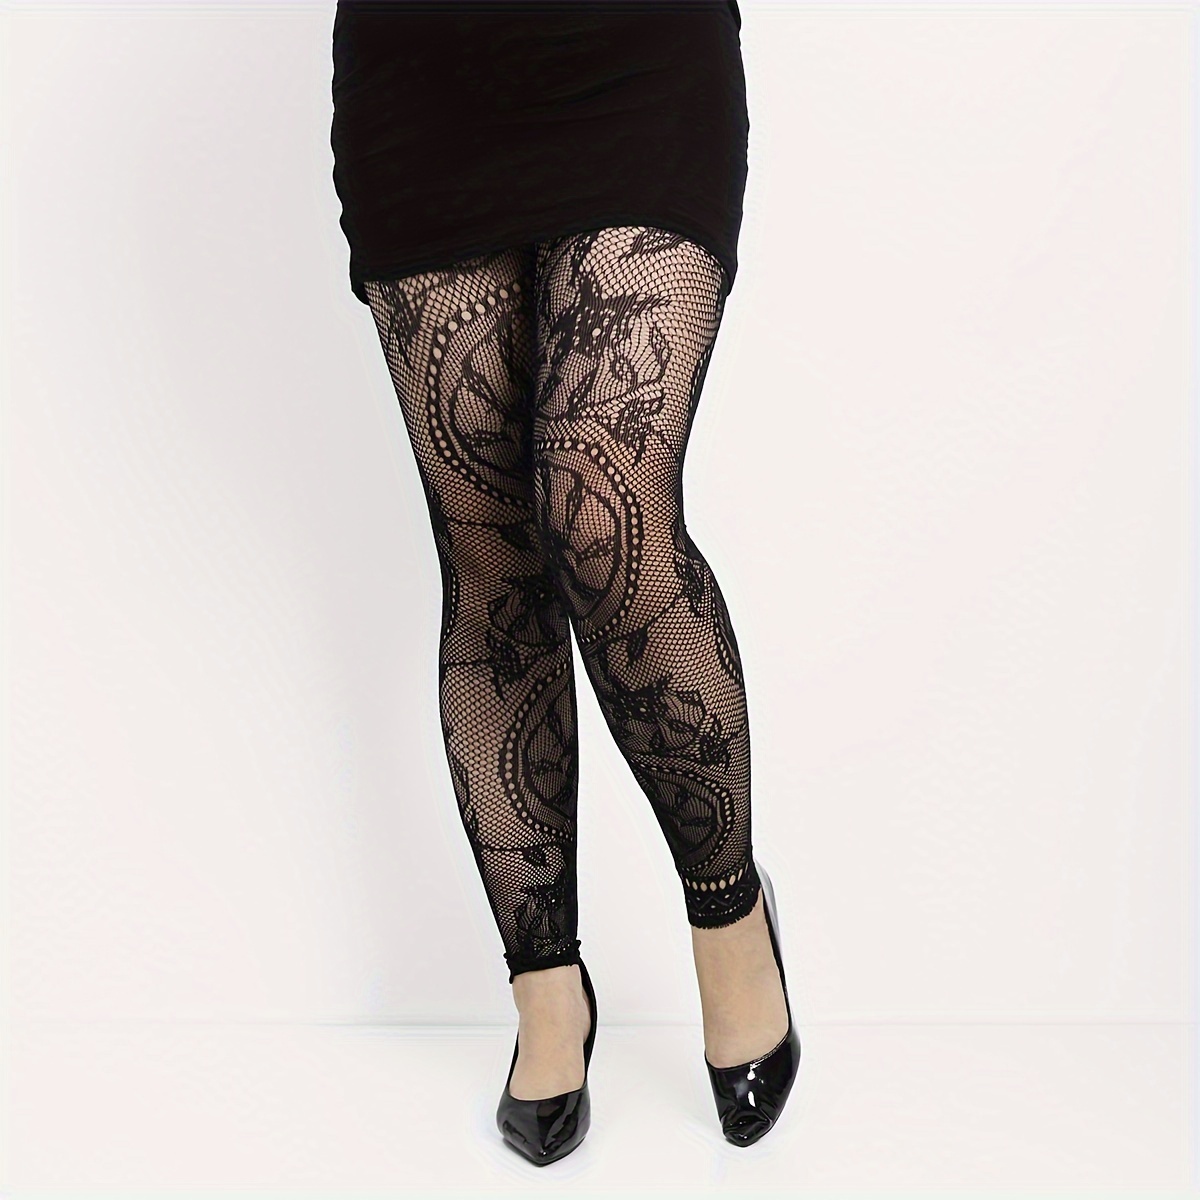 Floral Lace Footless Costume Leggings